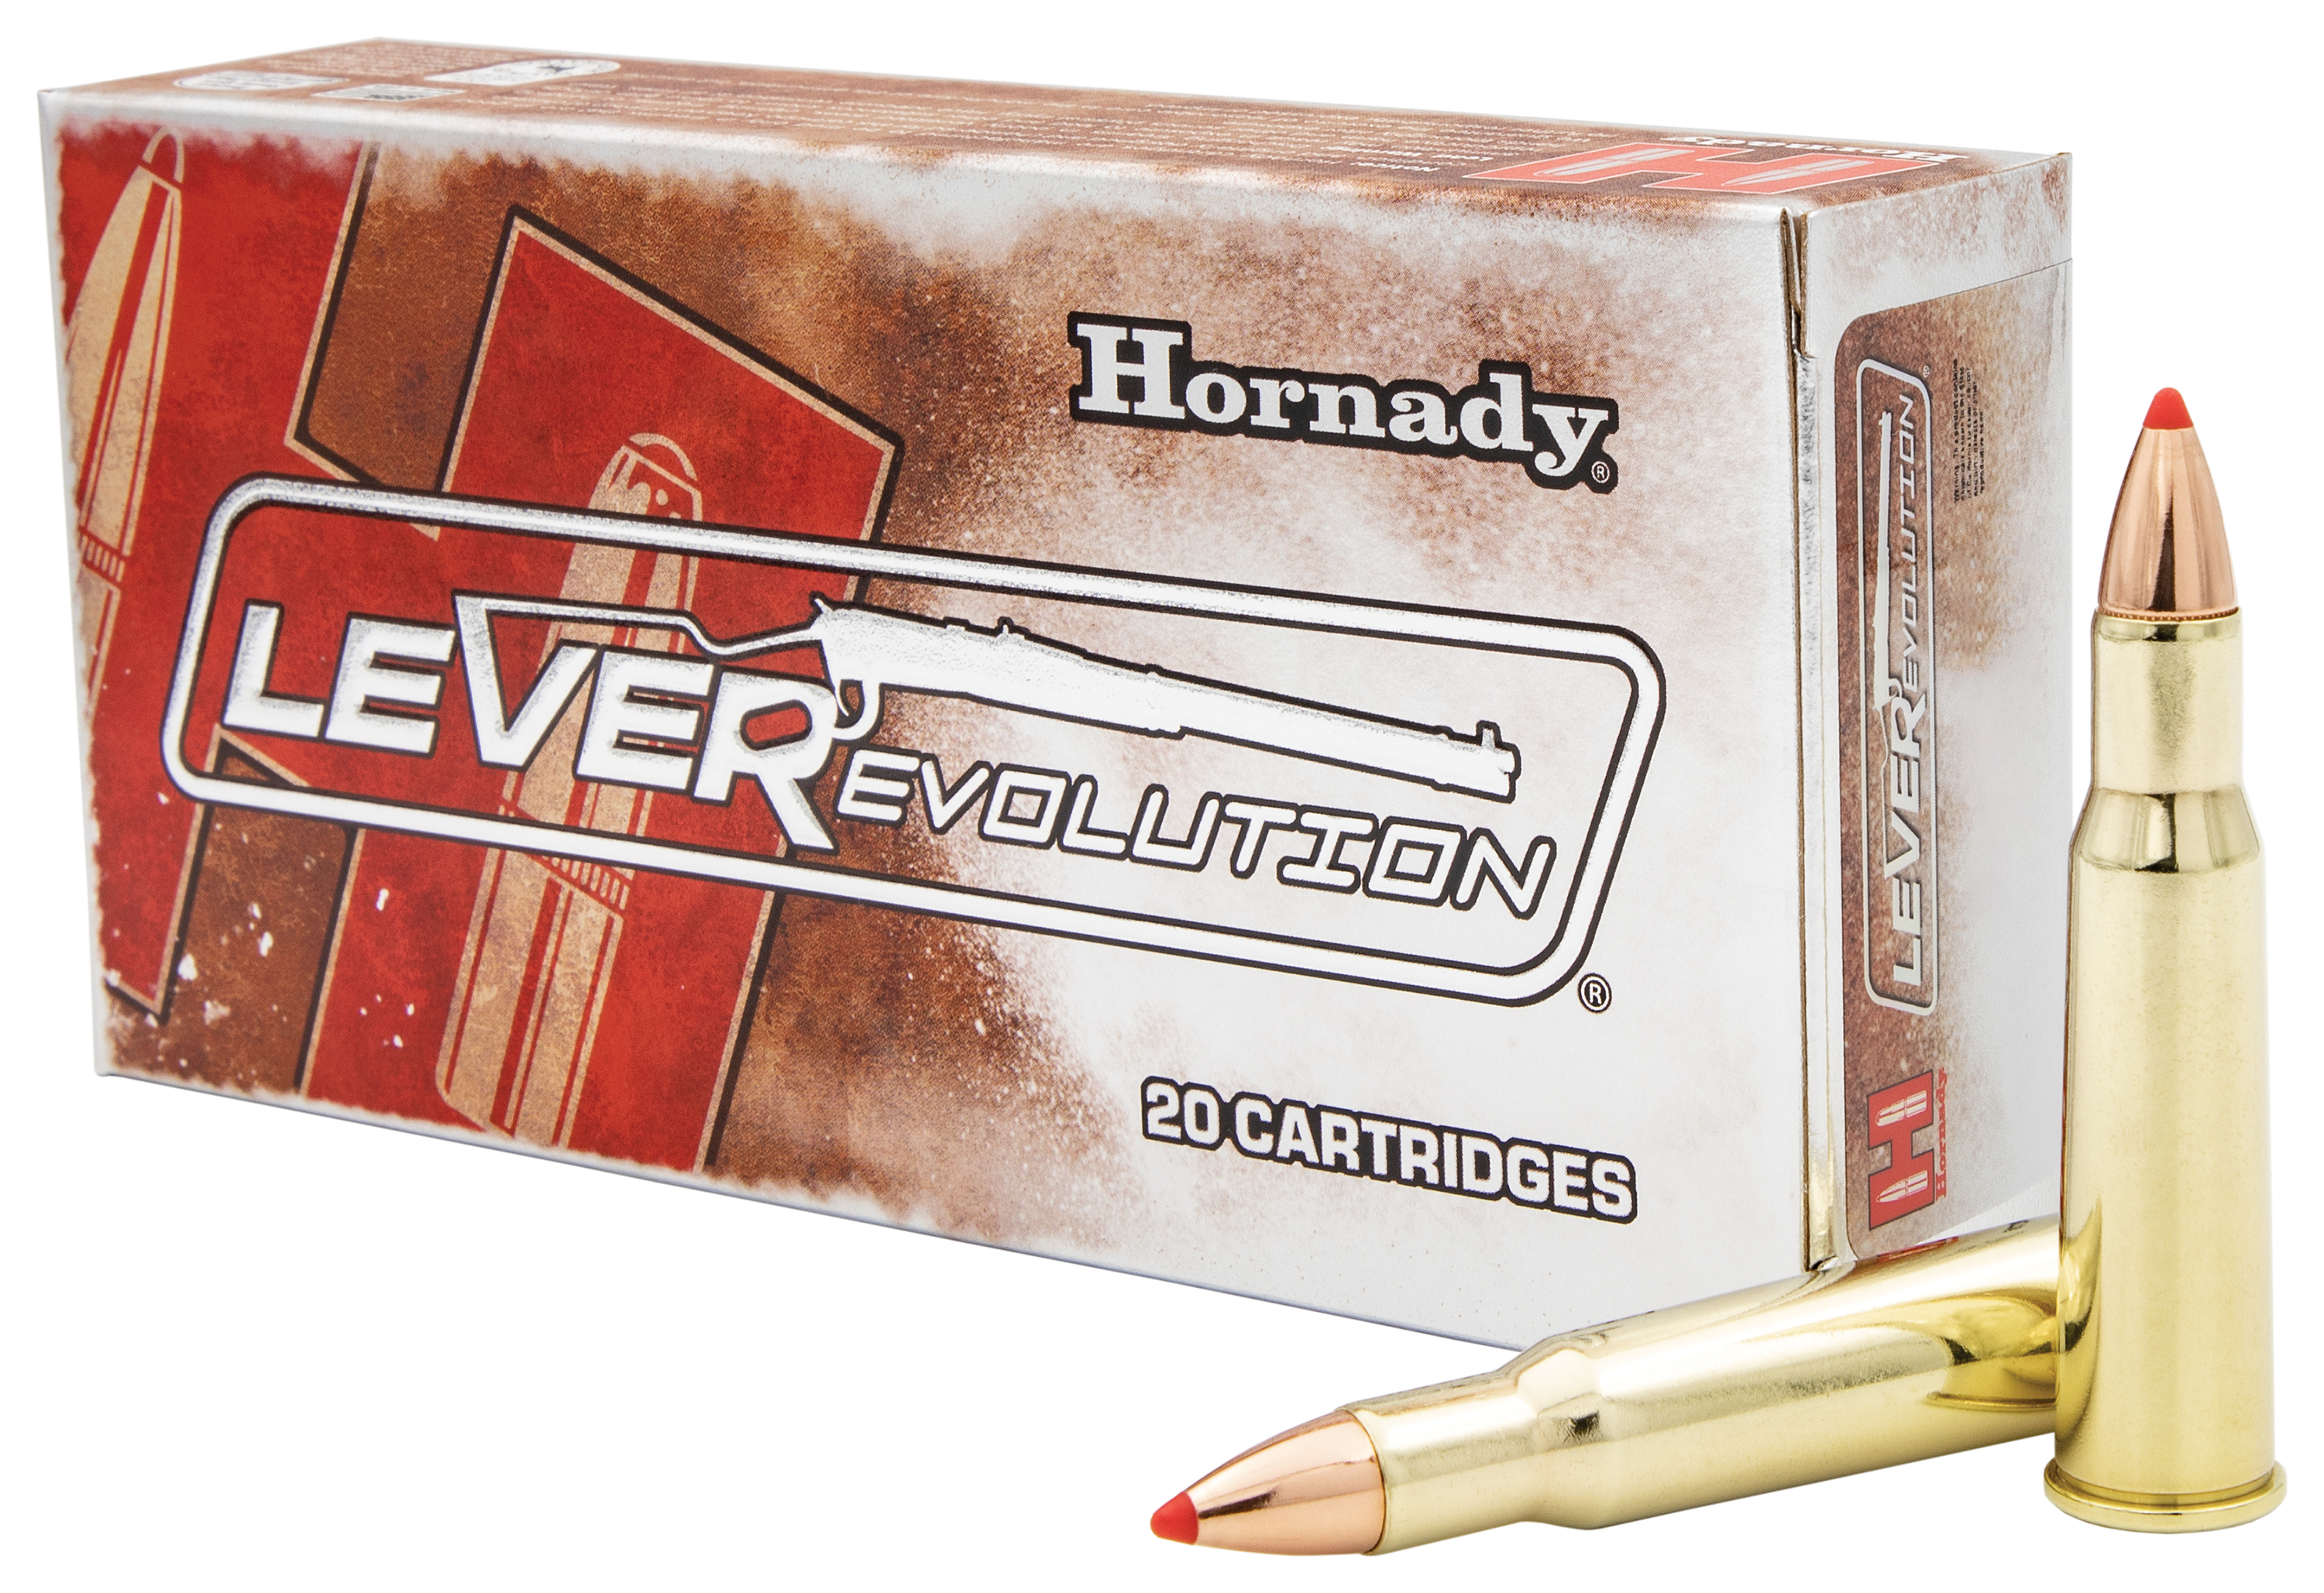 Hornady LEVERevolution Rifle Ammo - .45-70 Government Caliber - 250 Grain - 20 Rounds